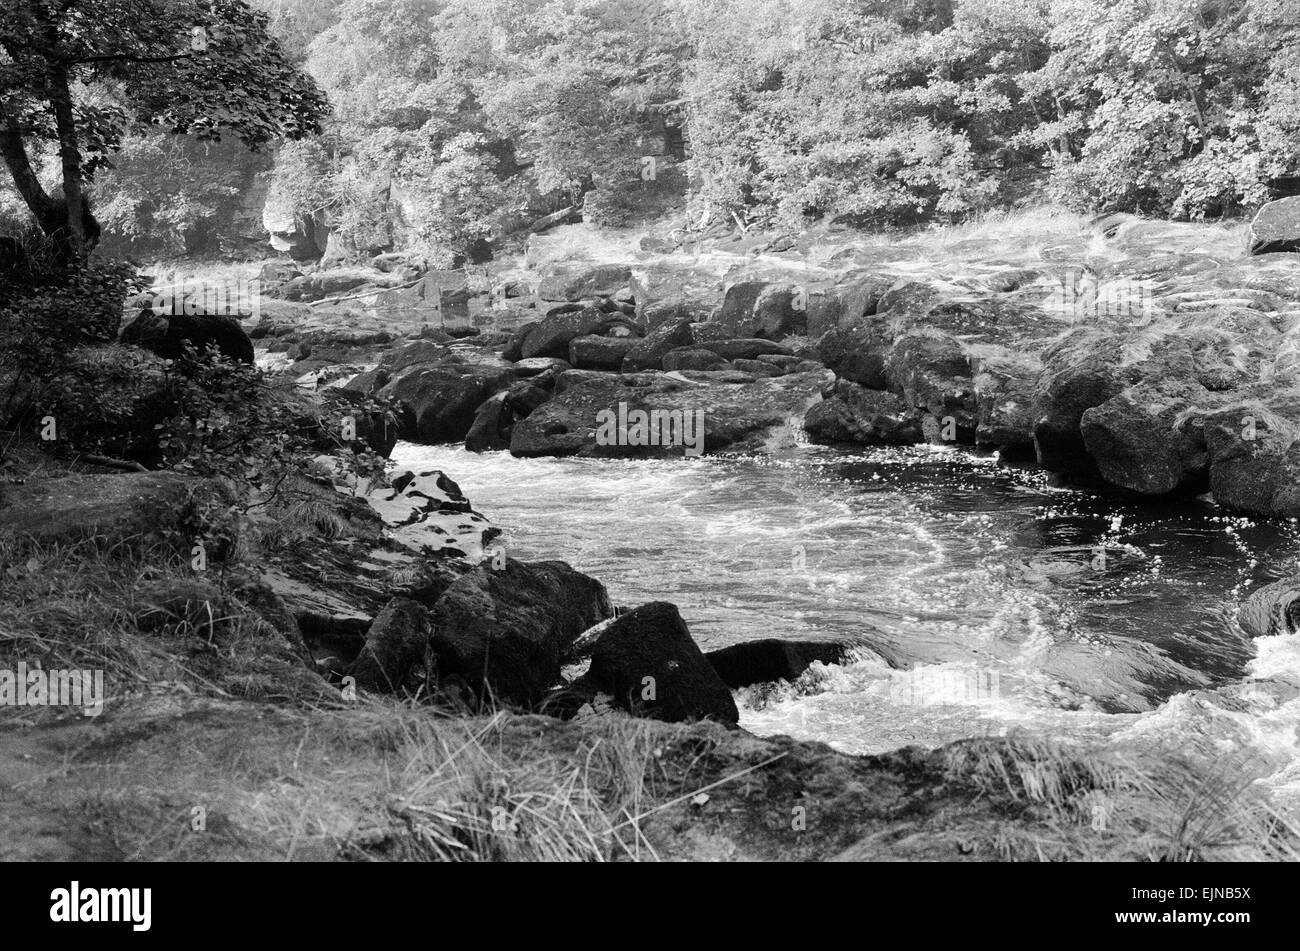 Die Strid in Bolton Abbey-Immobilien in Wharfedale in North Yorkshire, ca. 1970. Stockfoto